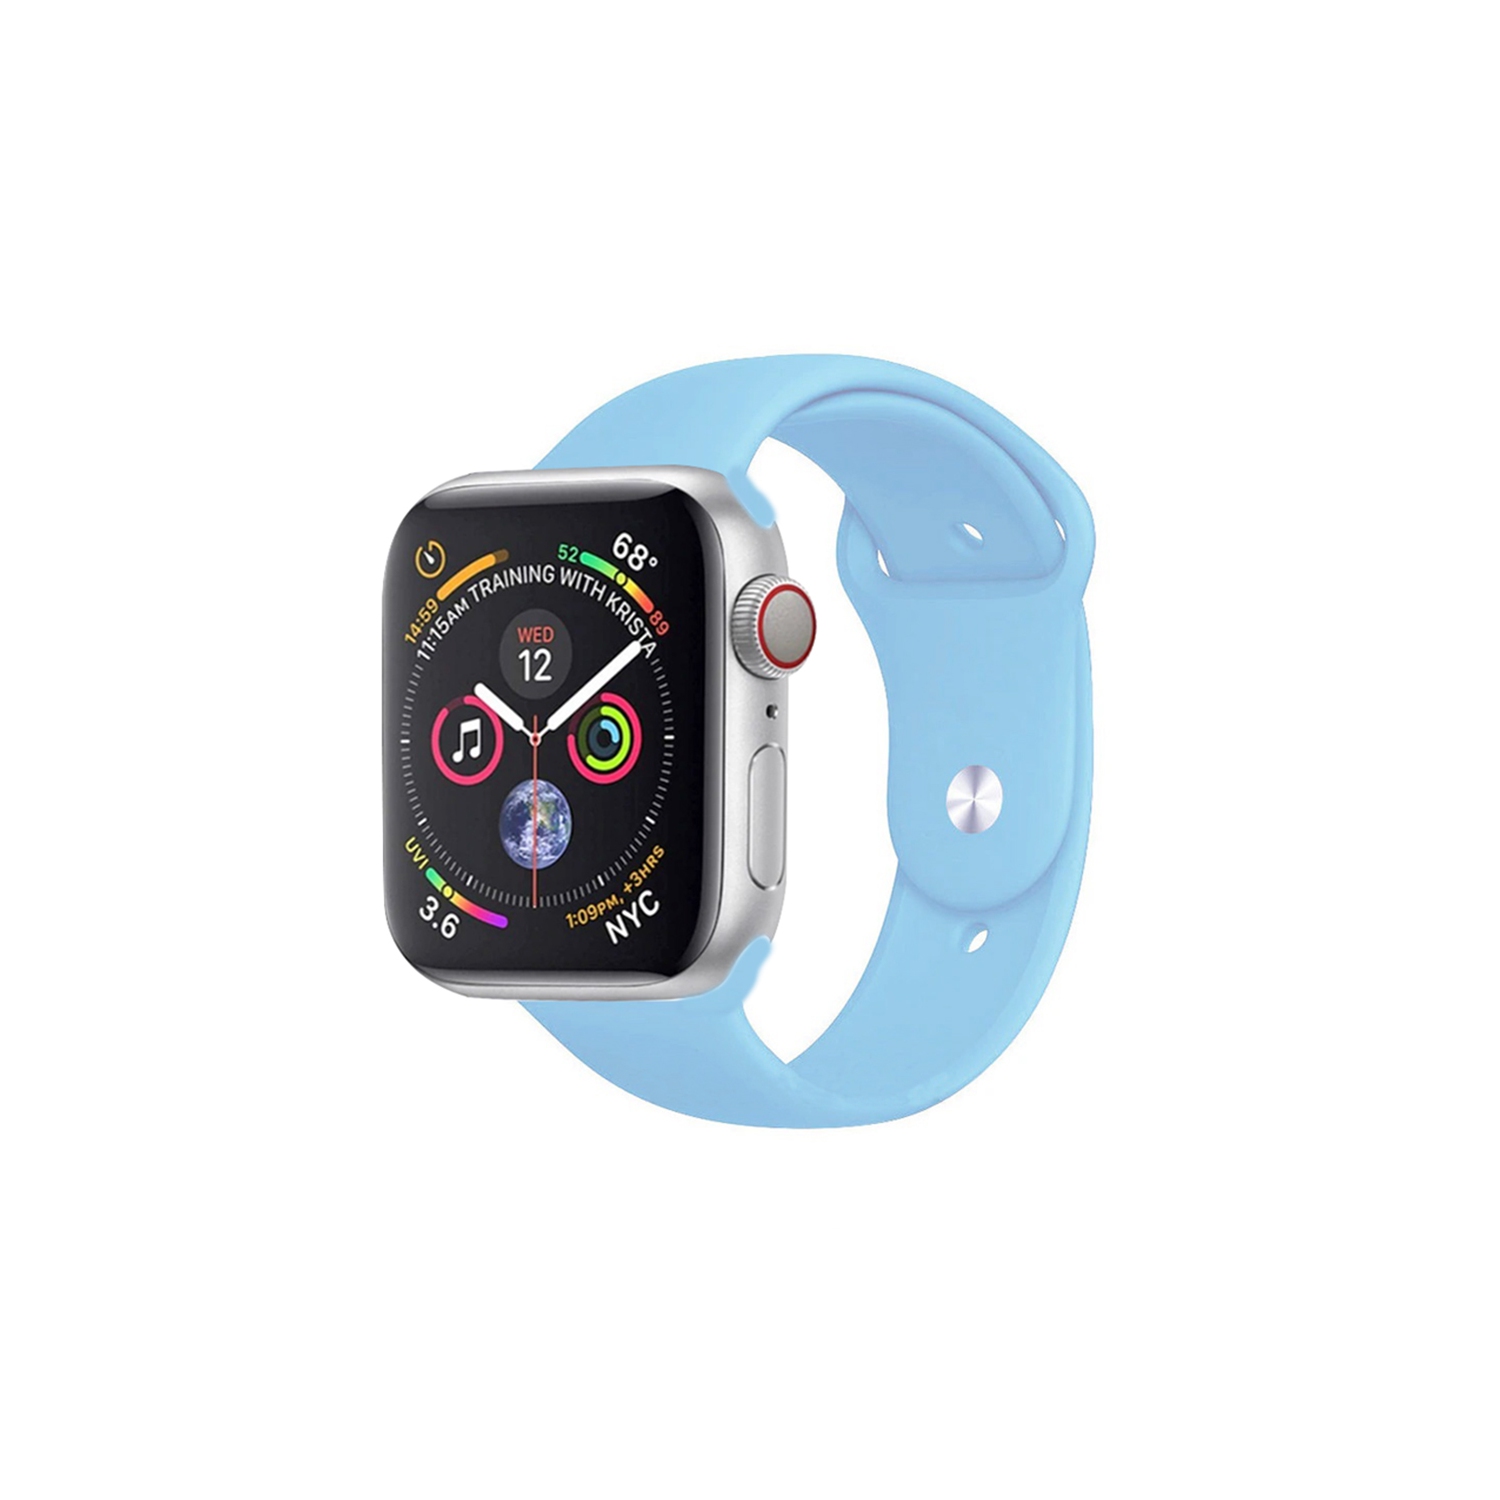 Watch Strap Silicone Sports Band Bracelet M/L Size For Apple iWatch Series 38mm/40mm - Light Blue